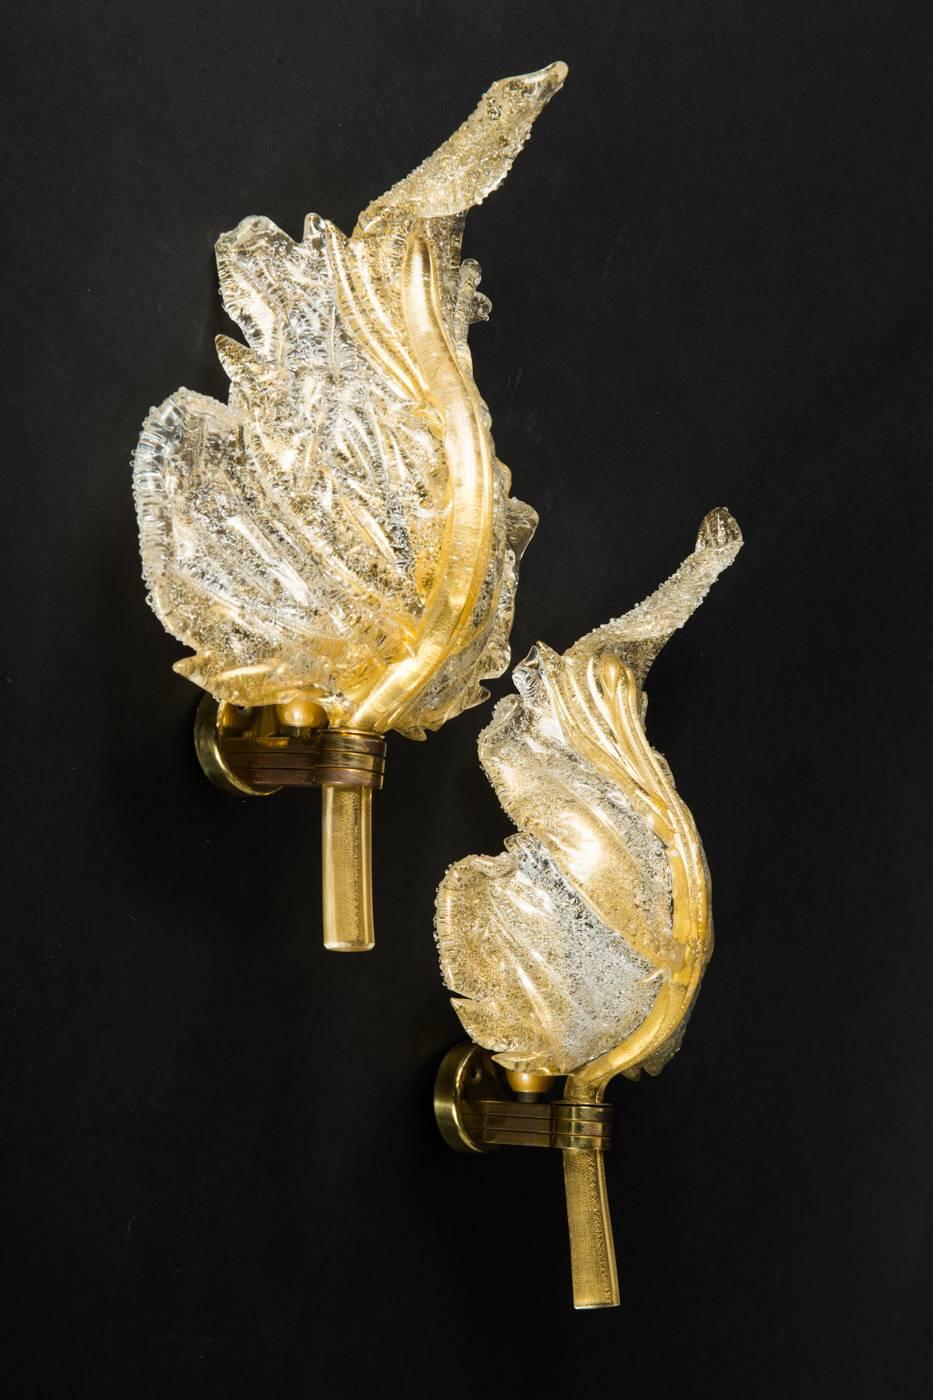 Pair of sconces, wall lamps in gold-painted metal and Murano glass with gold foils enclose, leaf-shaped diffuser with a focal point behind, inside with manufacturer's adhesive label
Dimensions: L 38cm, W 24 cm, T 12 cm
Excellent original